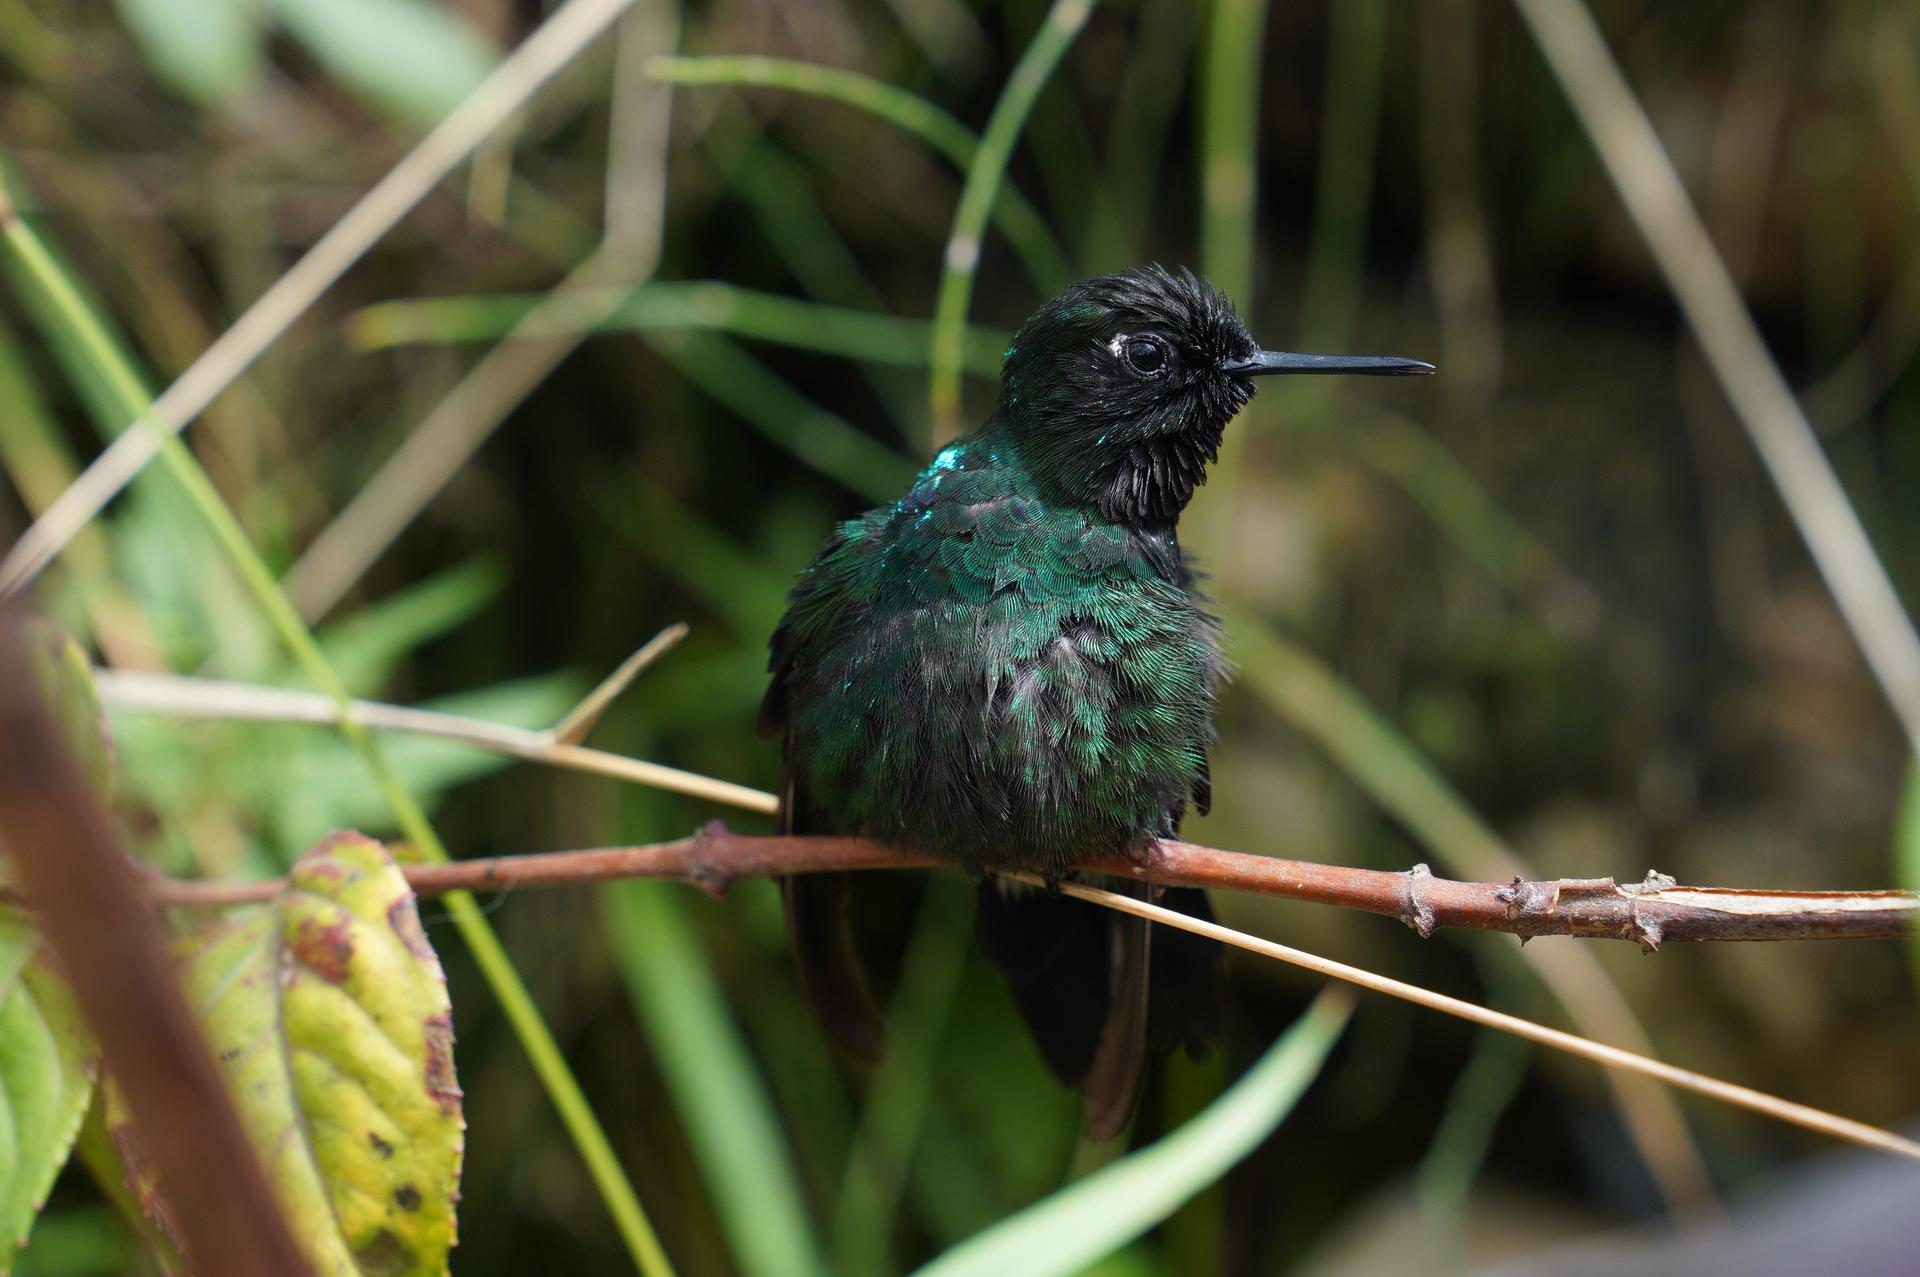 More than 1900 bird species have been spotted in Colombia, more than in any other country.